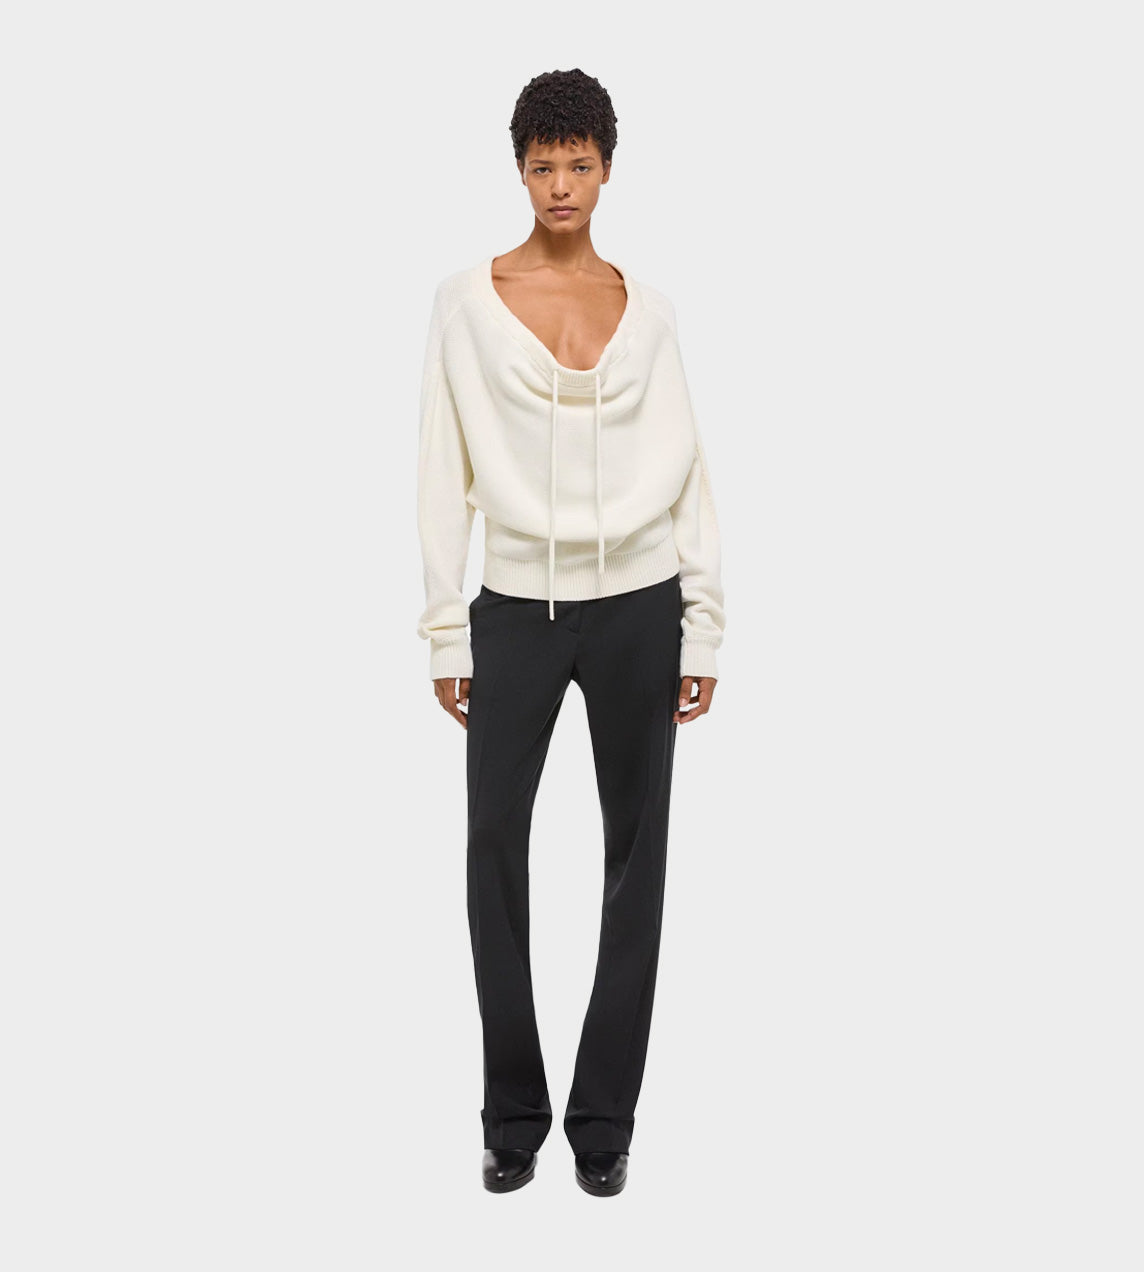 Helmut Lang - Ruched Dolman Sweater Ivory